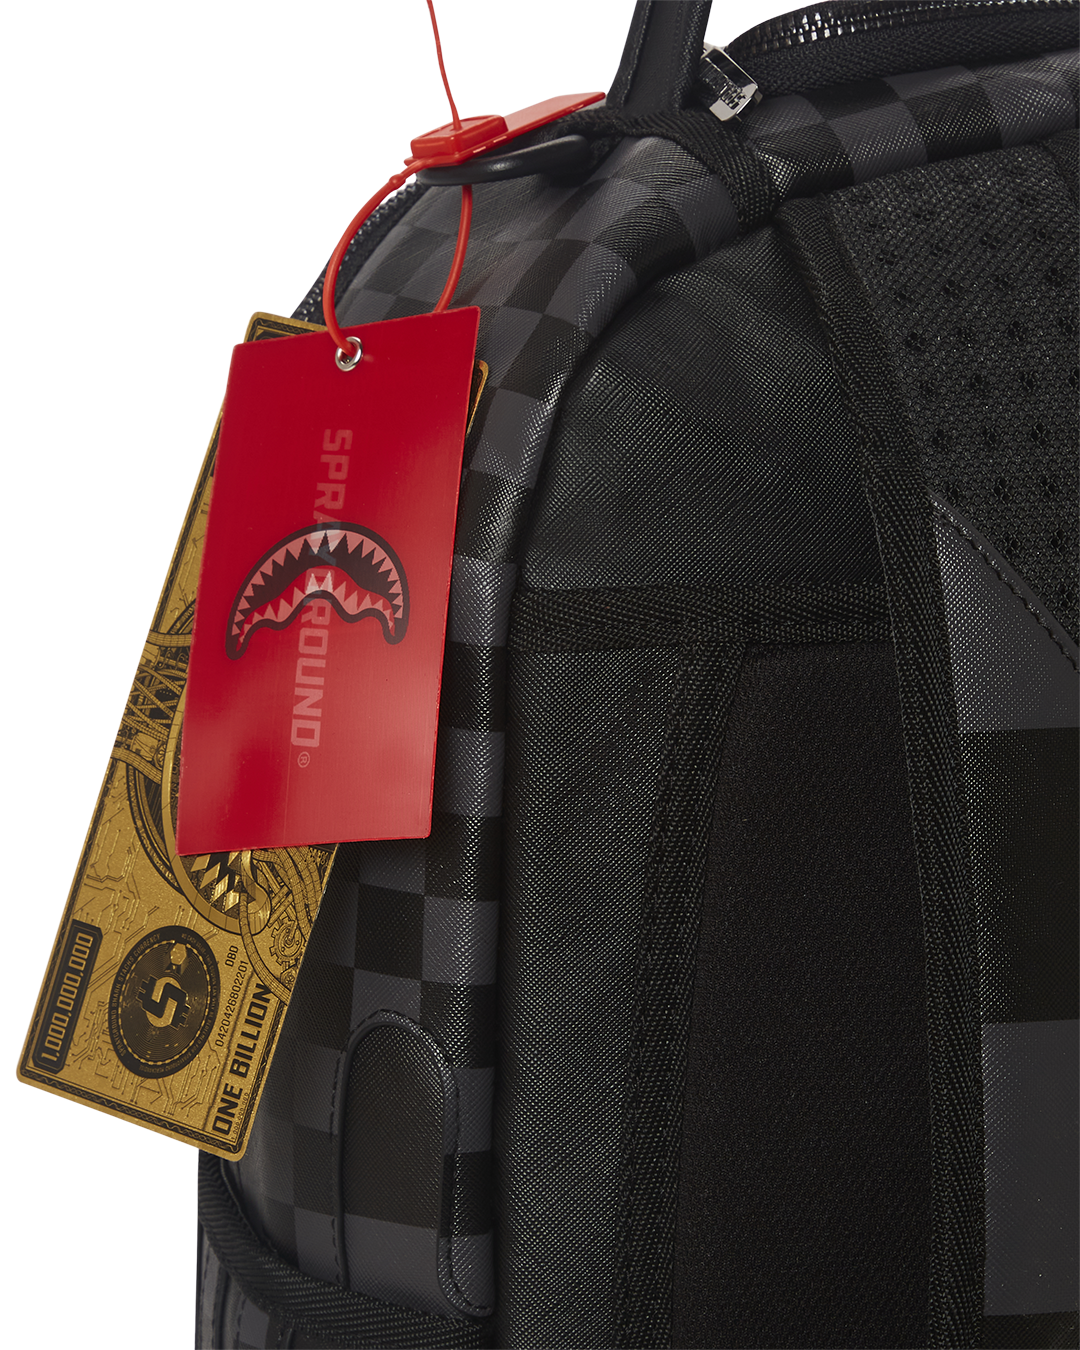 SHARKS IN PARIS CHARACTERS SNEAKIN BACKPACK (DLXV) – SPRAYGROUND®